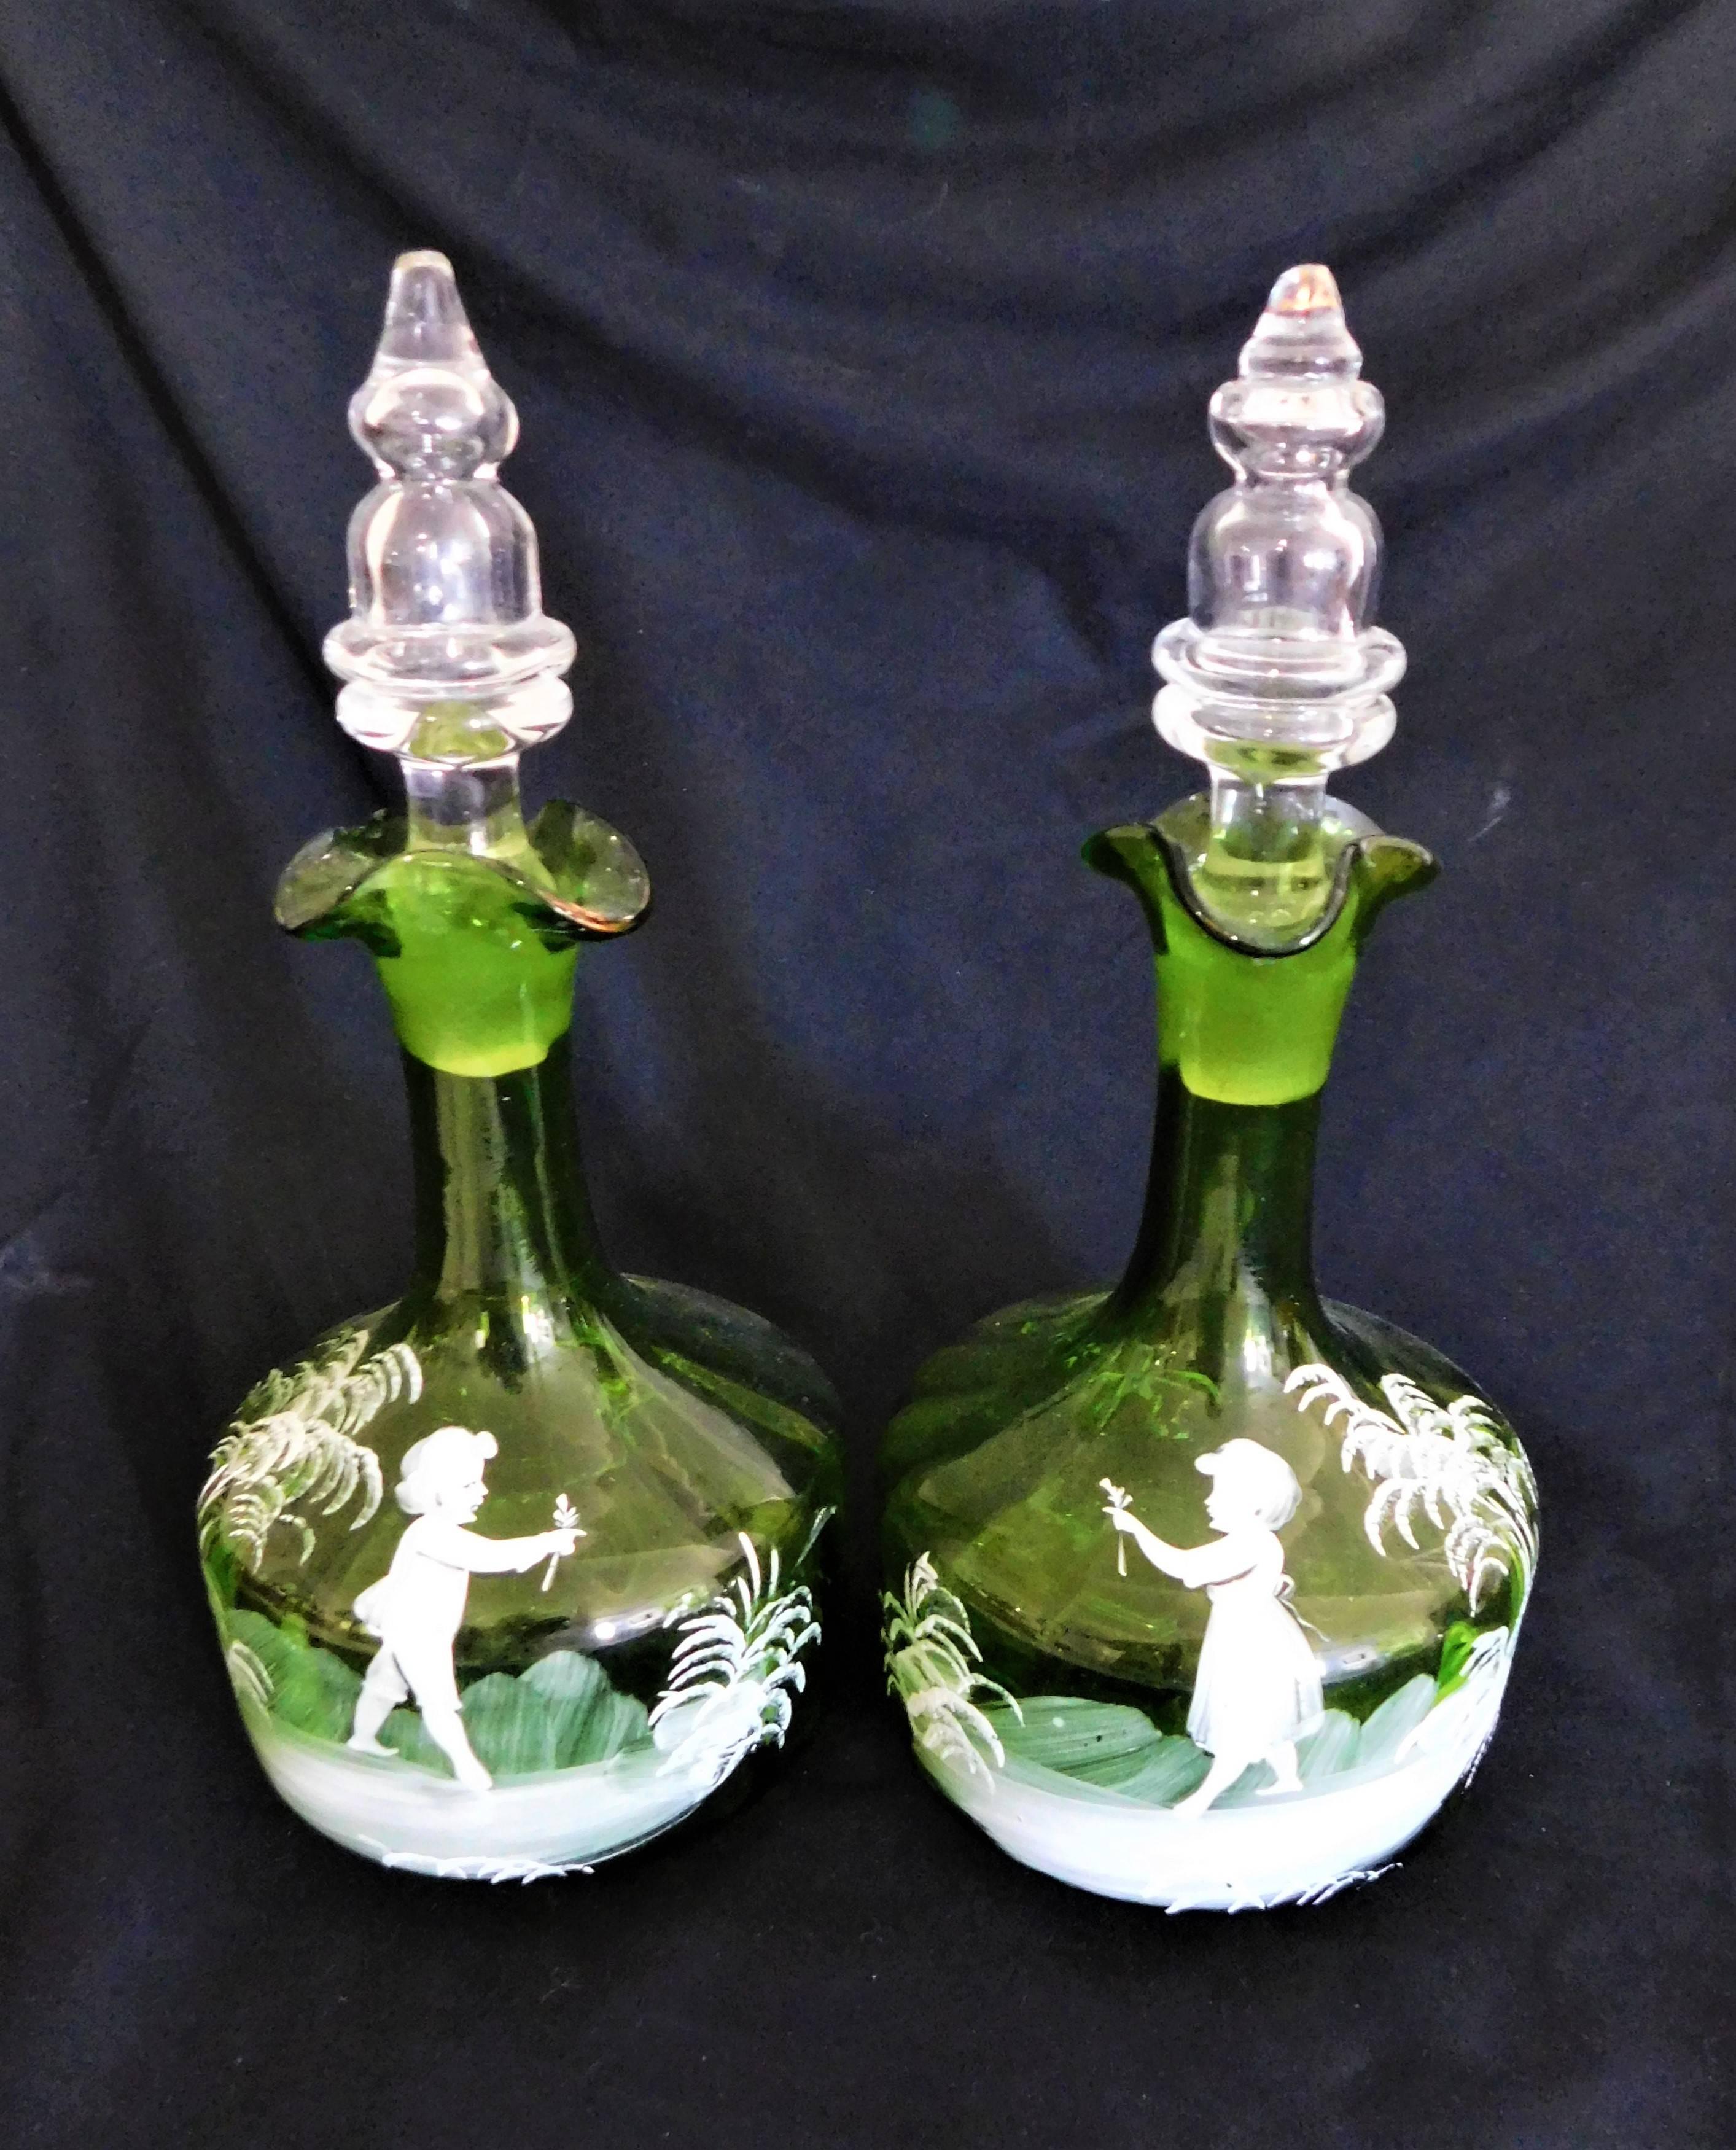 This is a pair of English handblown and hand-painted Mary Gregory decanters, circa 1880, each decanter has a different design.